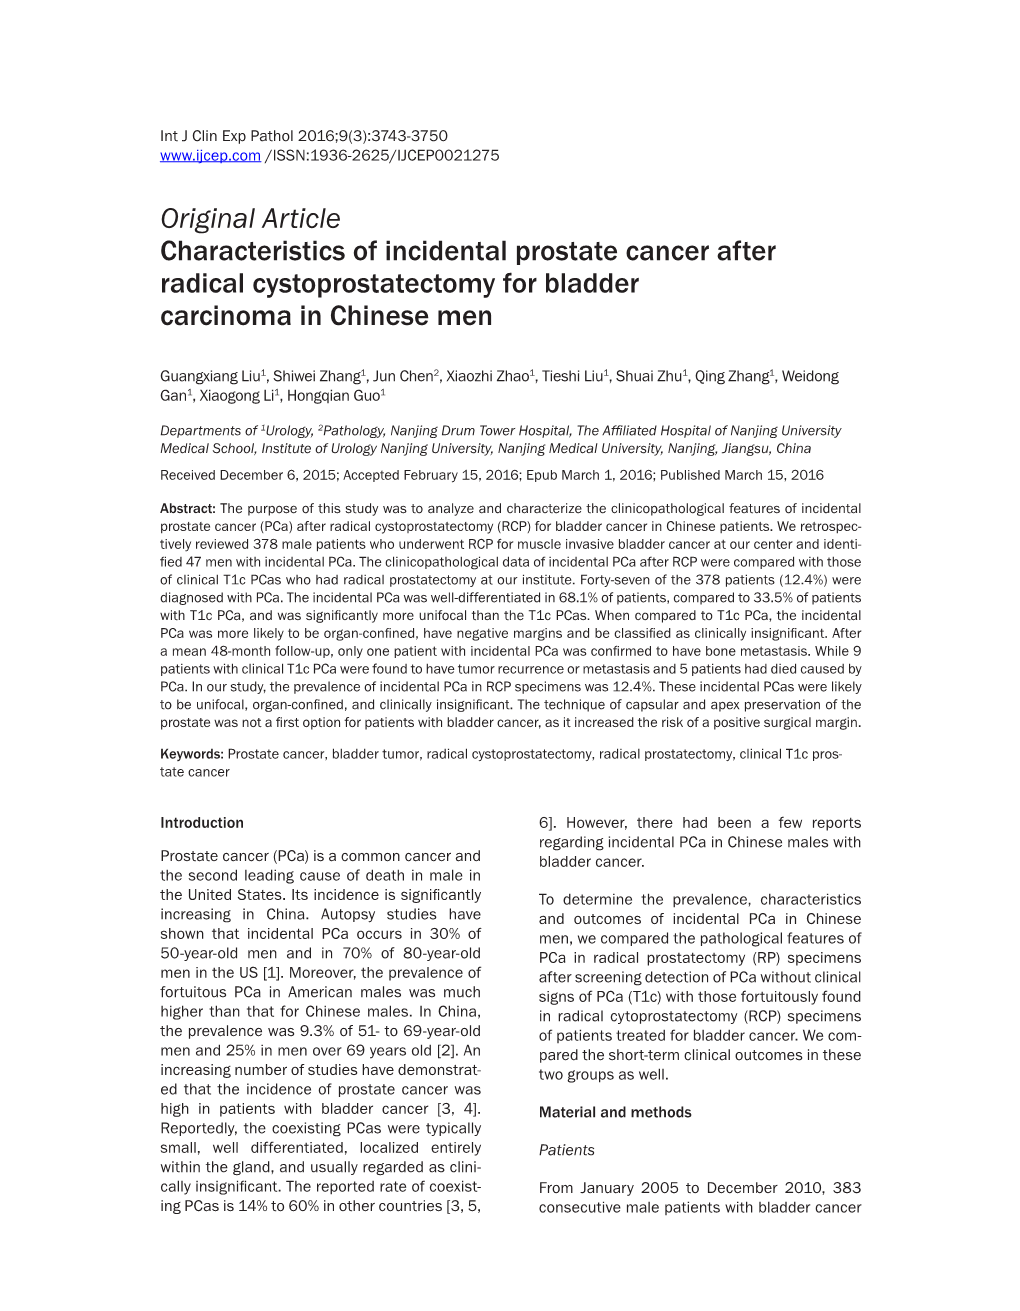 Original Article Characteristics of Incidental Prostate Cancer After Radical Cystoprostatectomy for Bladder Carcinoma in Chinese Men